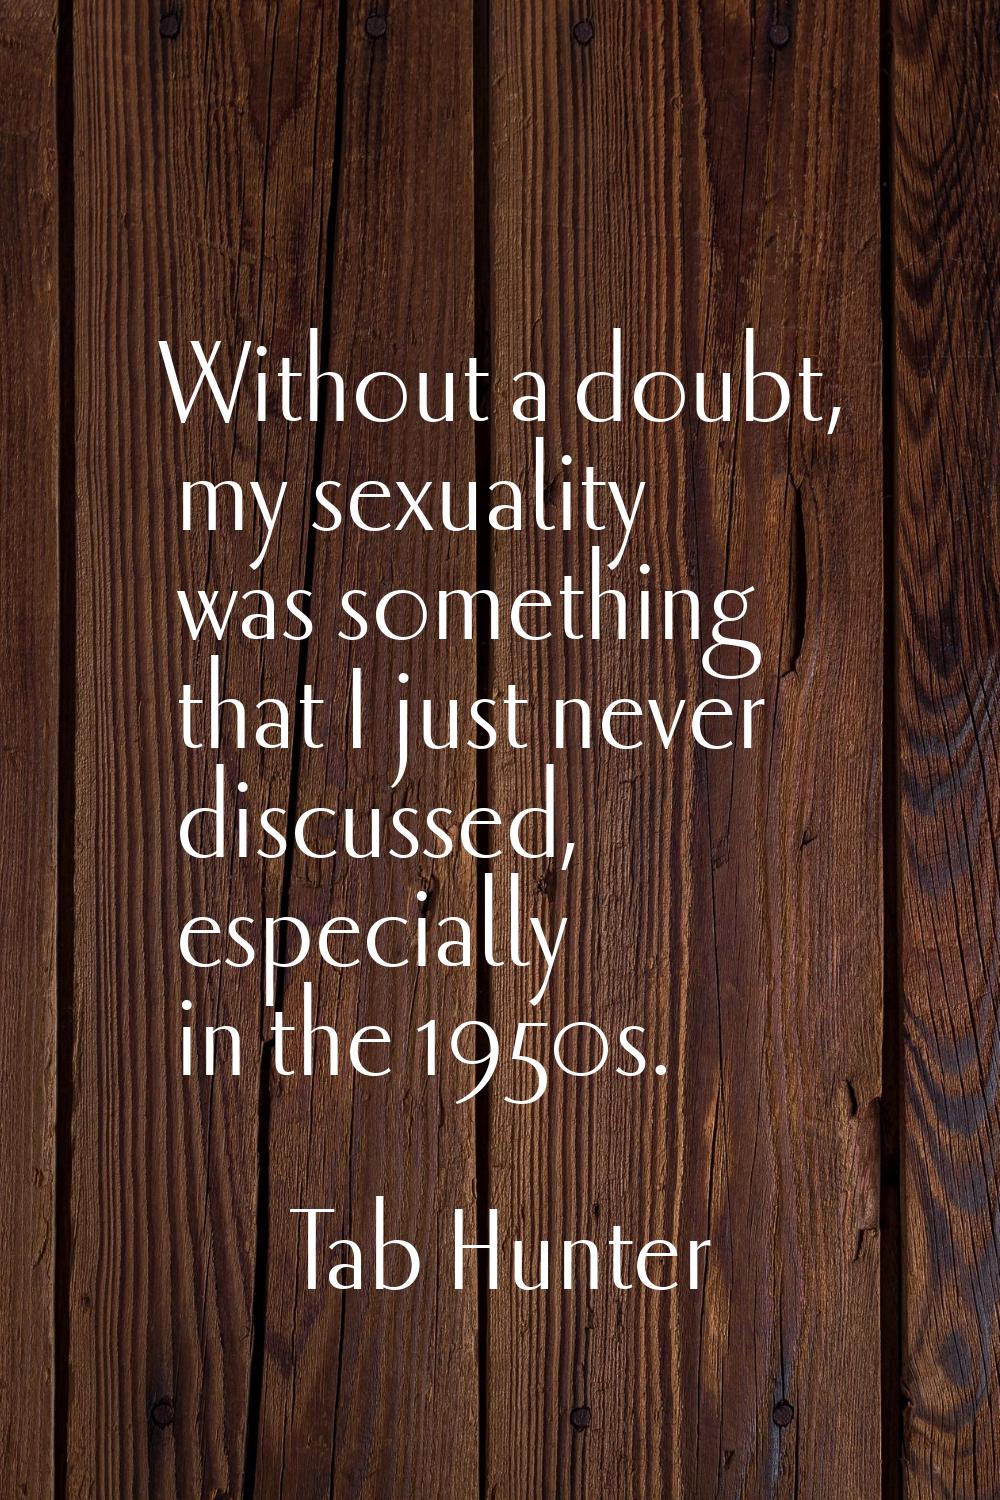 Without a doubt, my sexuality was something that I just never discussed, especially in the 1950s.